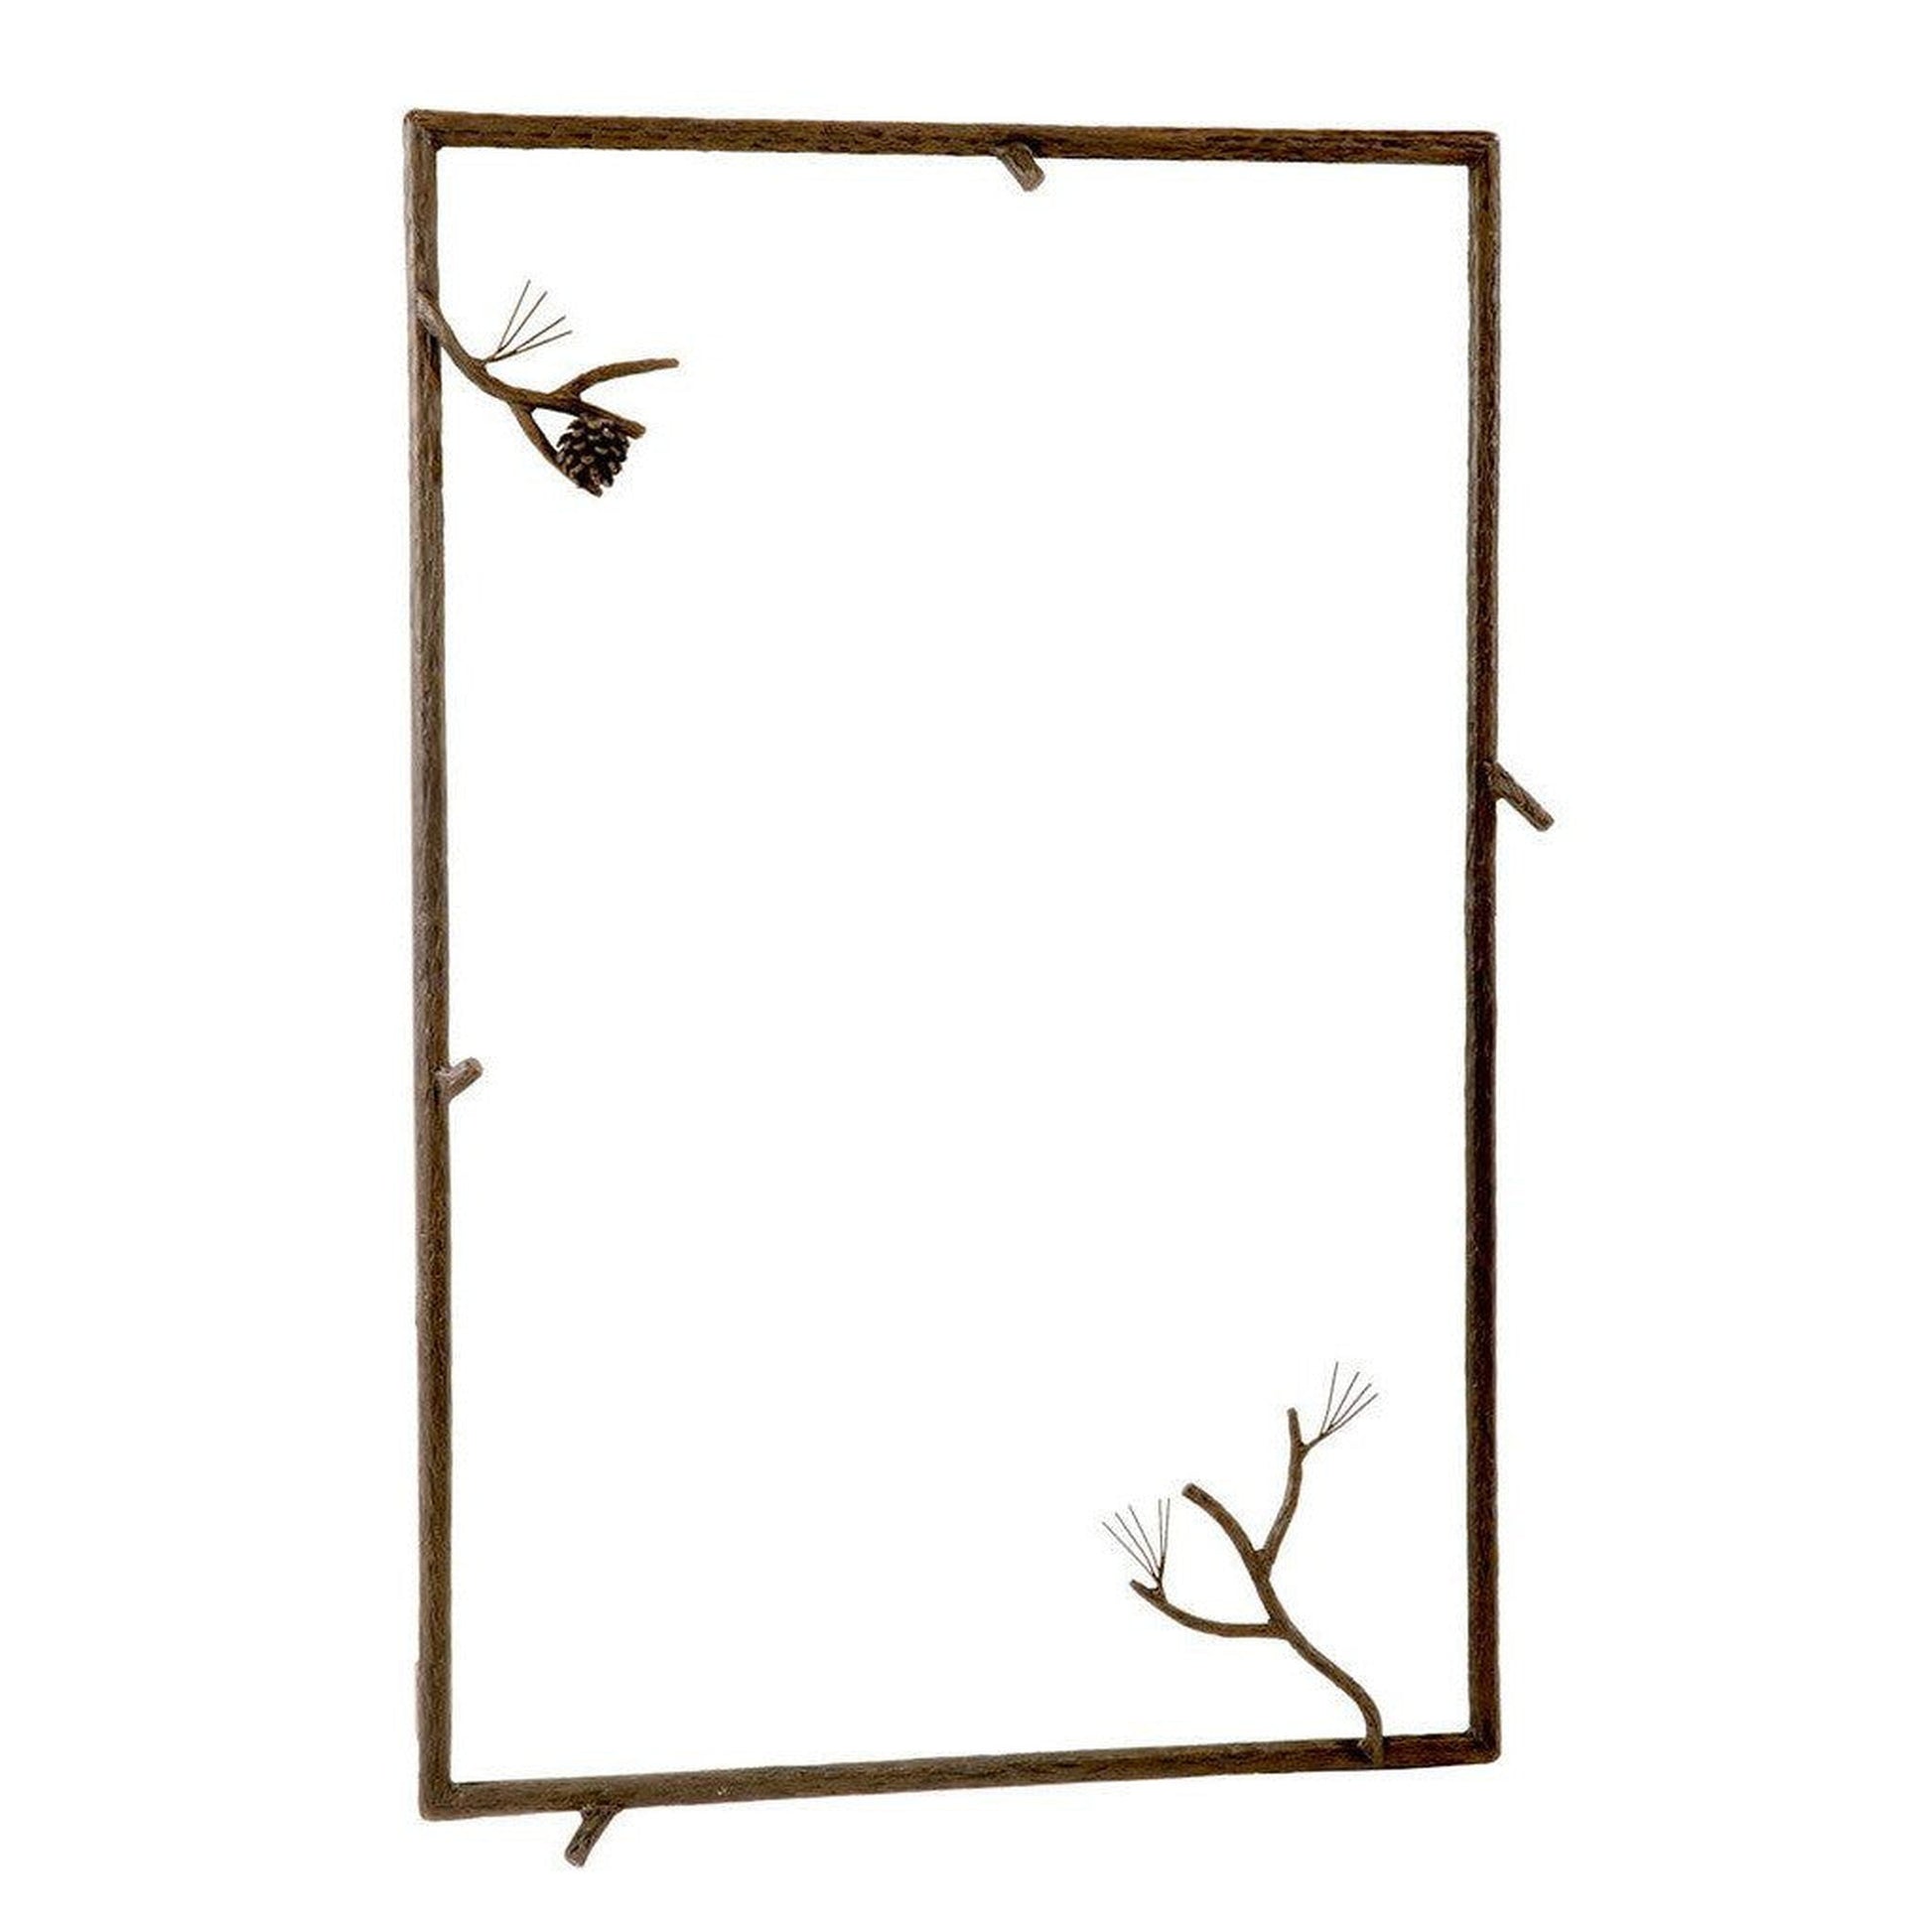 Stone County Ironworks Pine 37" x 25" Large Natural Black Iron Wall Mirror With Copper Iron Accent